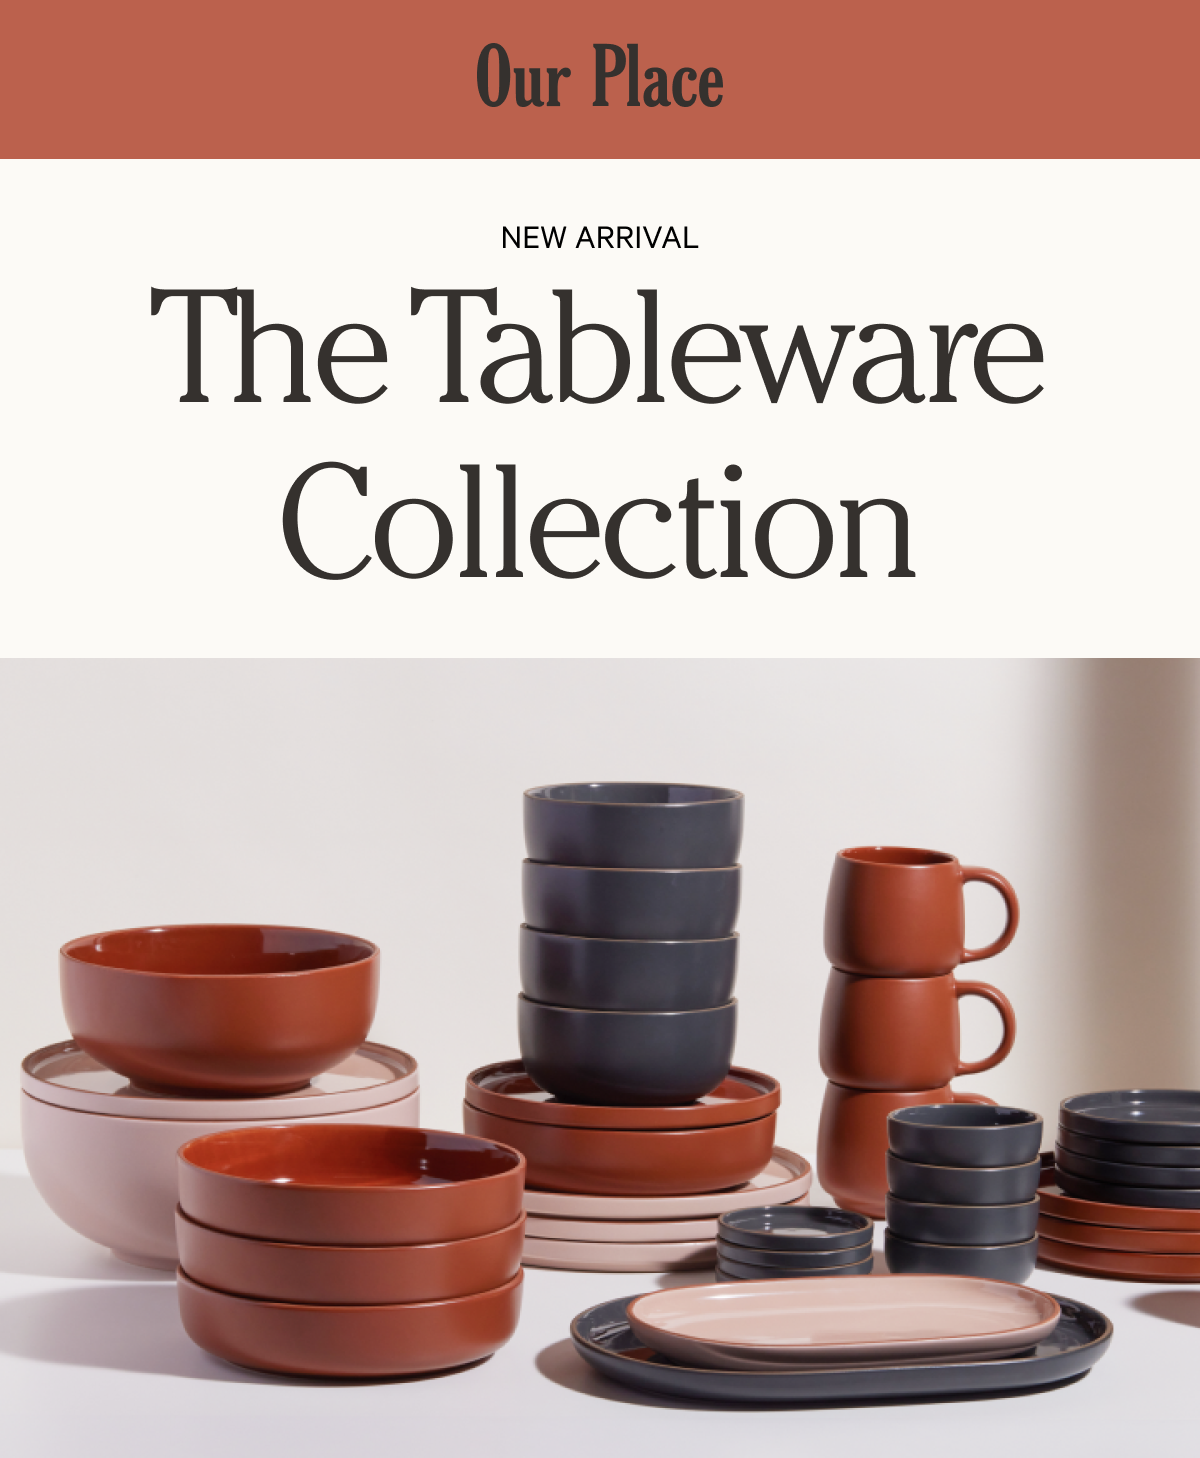 Our Place - New Arrival - The Tableware Collection